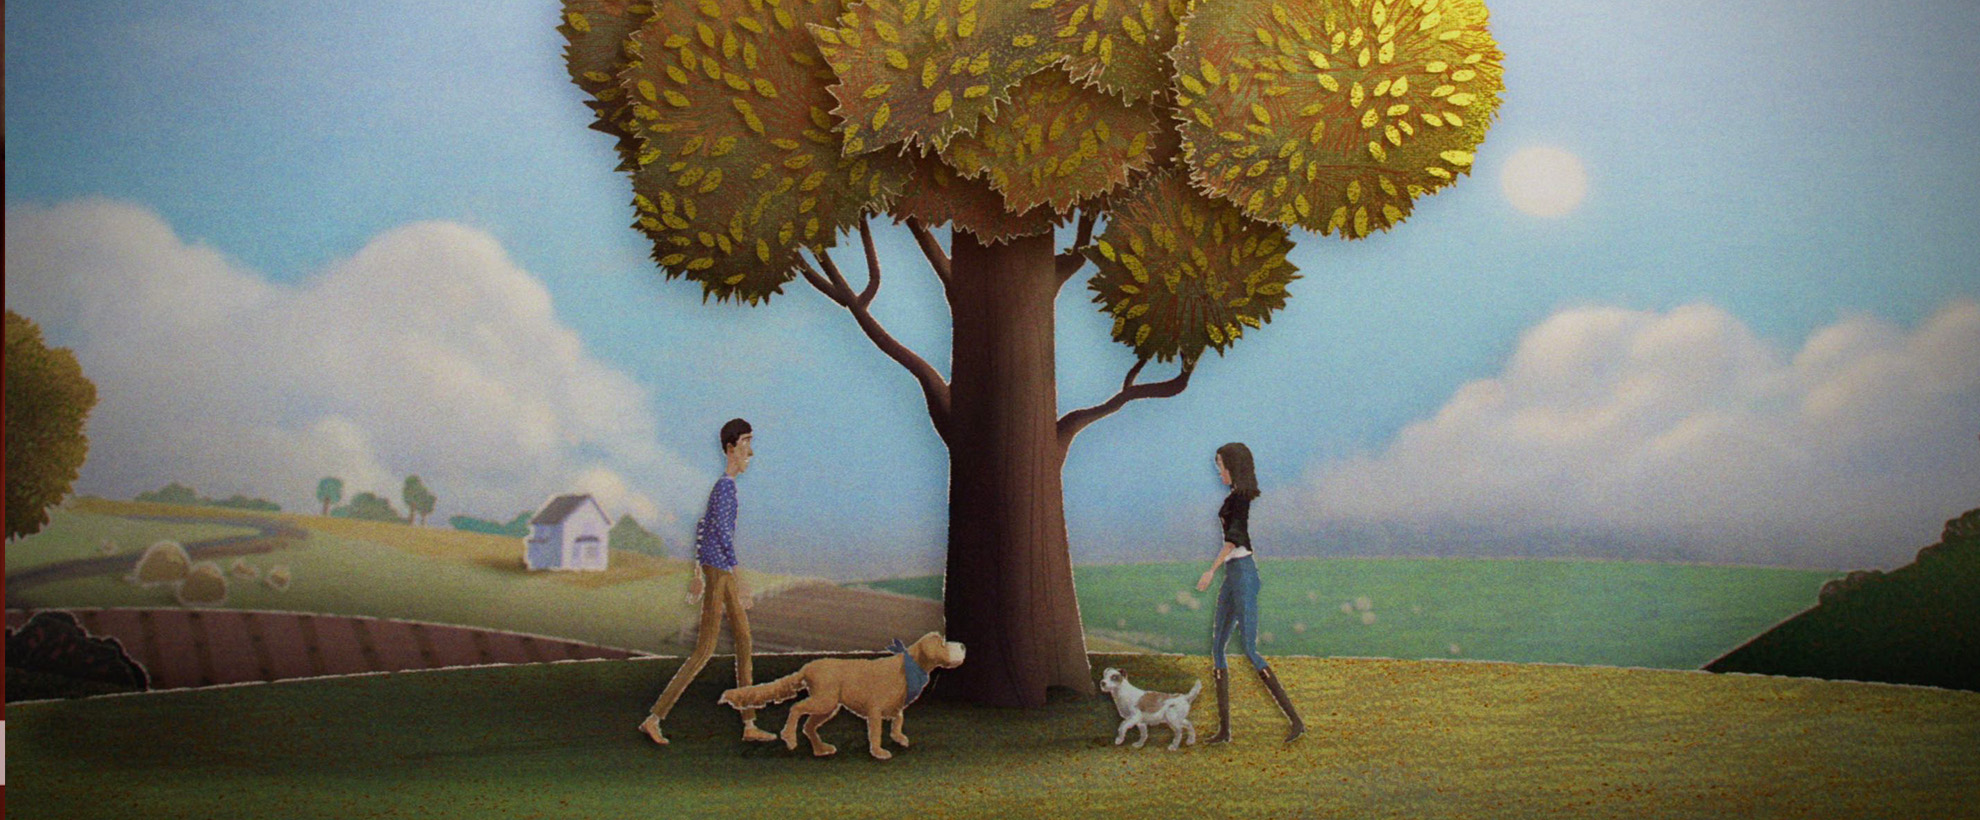 An animated woman and man walk their dogs in the grass under a tree